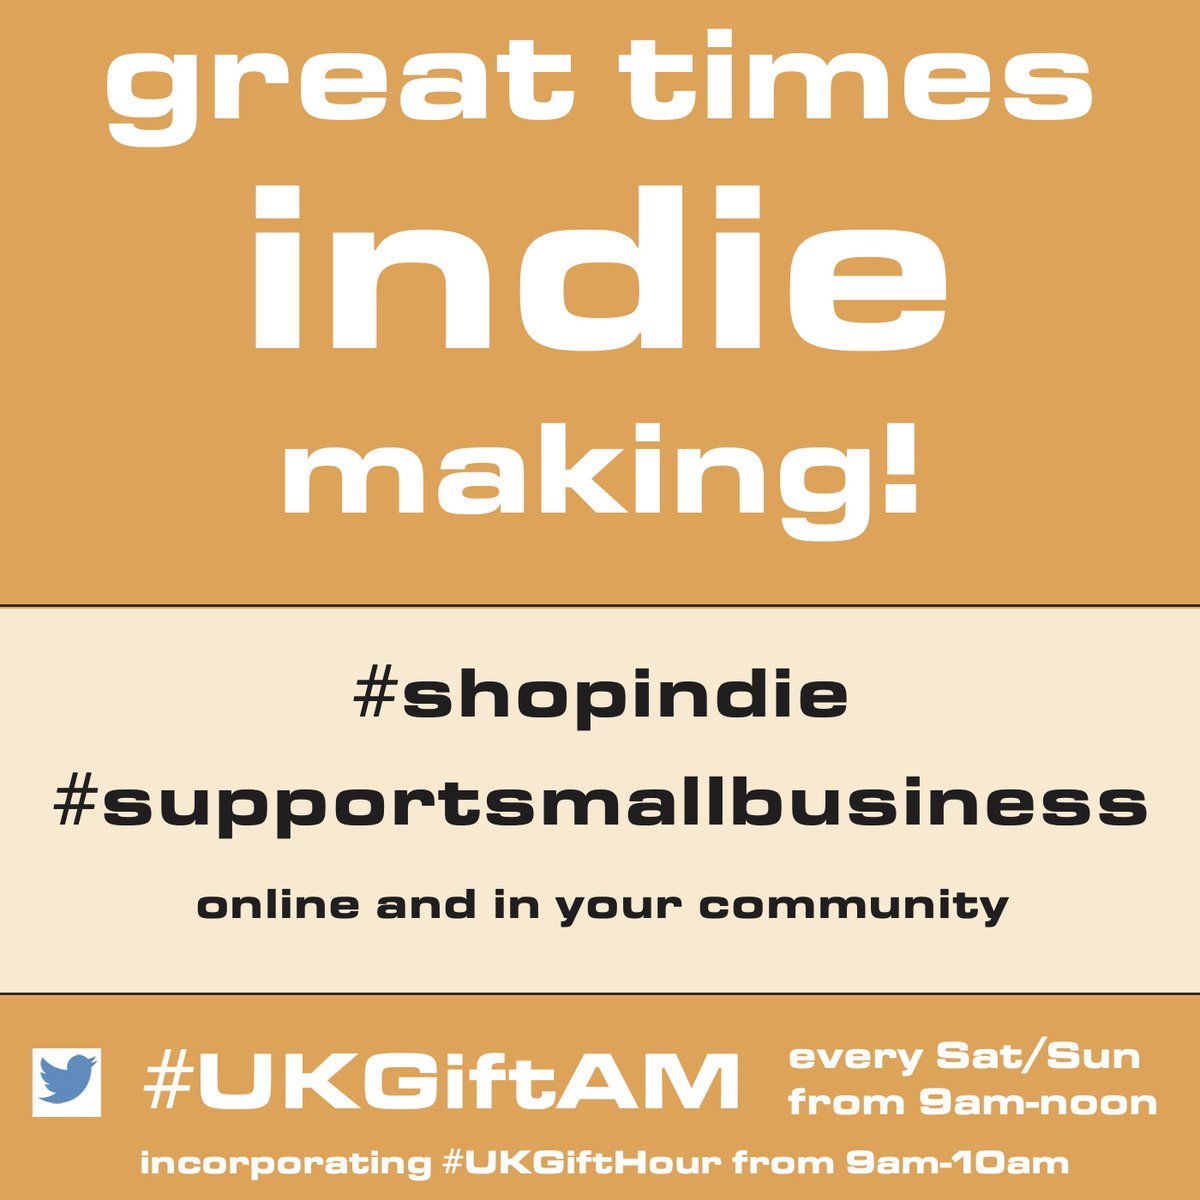 It's 9am - time to browse some #SundayMorning #shopindie goodies from the comfort of your own home! #UKGiftHour #UKGiftAM is open, highlighting original #giftideas from UK indies & creatives. Share and be sure to spread the word about #supportsmallbusiness 🤗🎁 #giftfinder